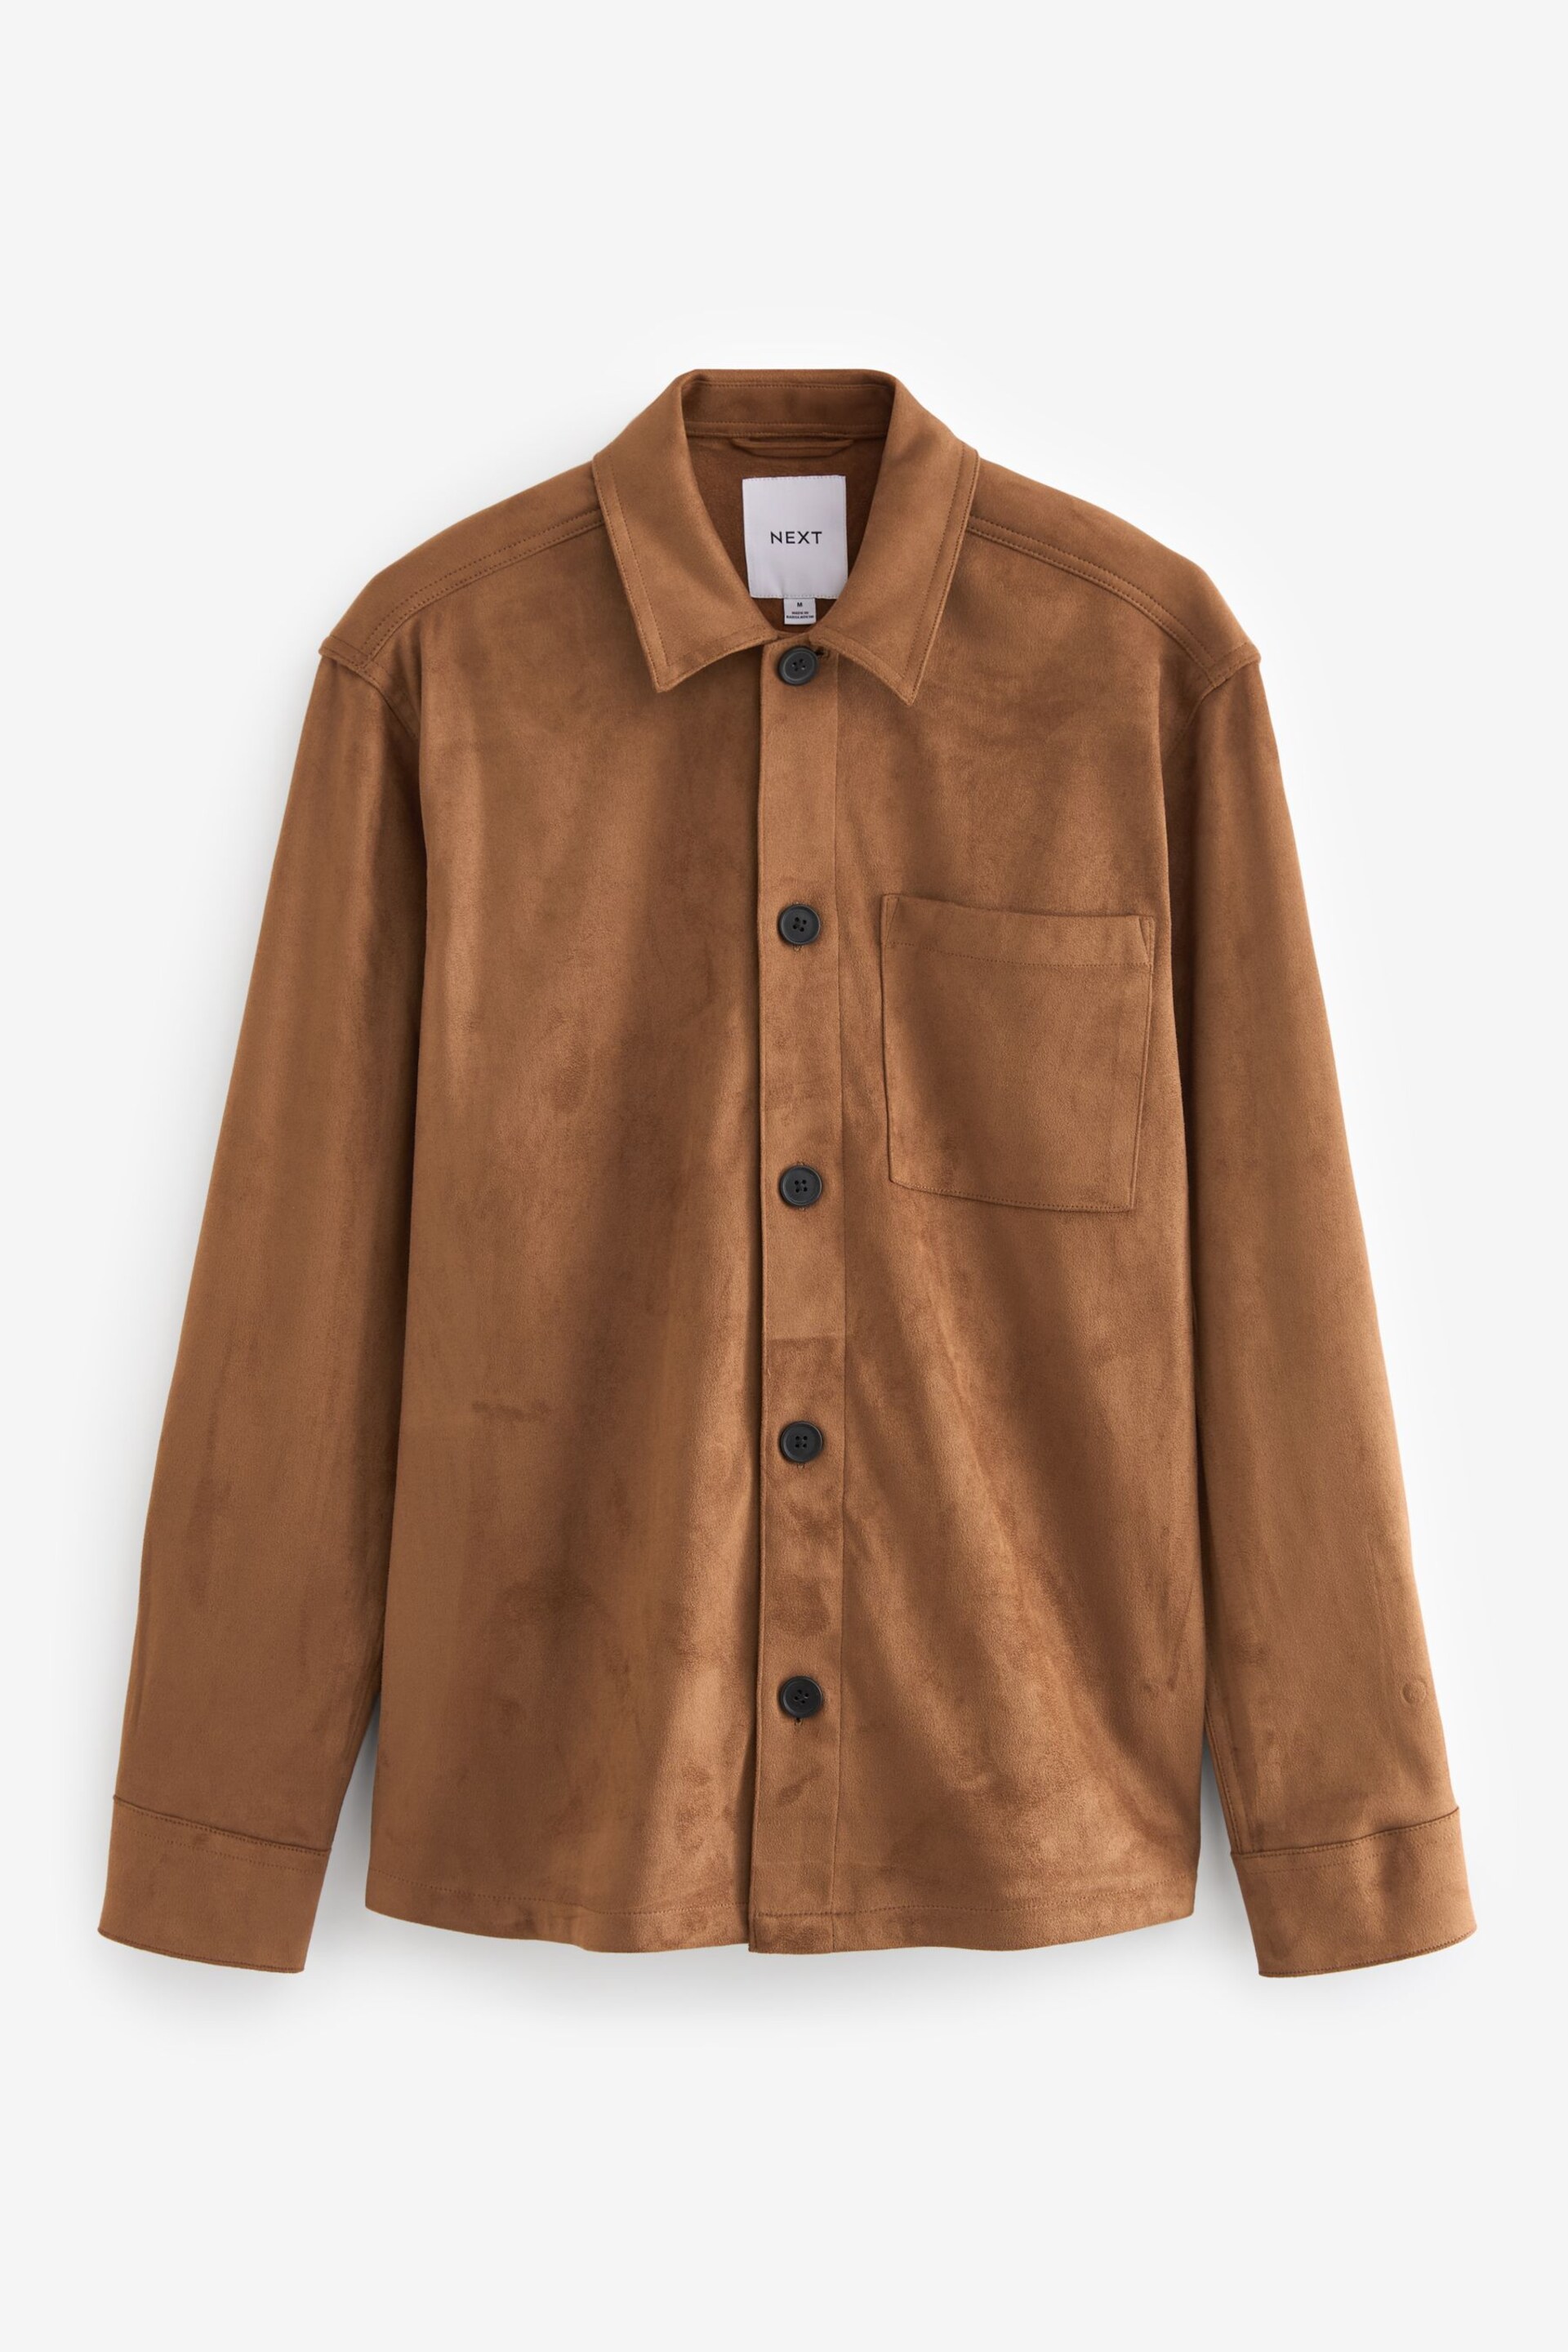 Tan Brown Faux Suede Shacket - Image 6 of 8